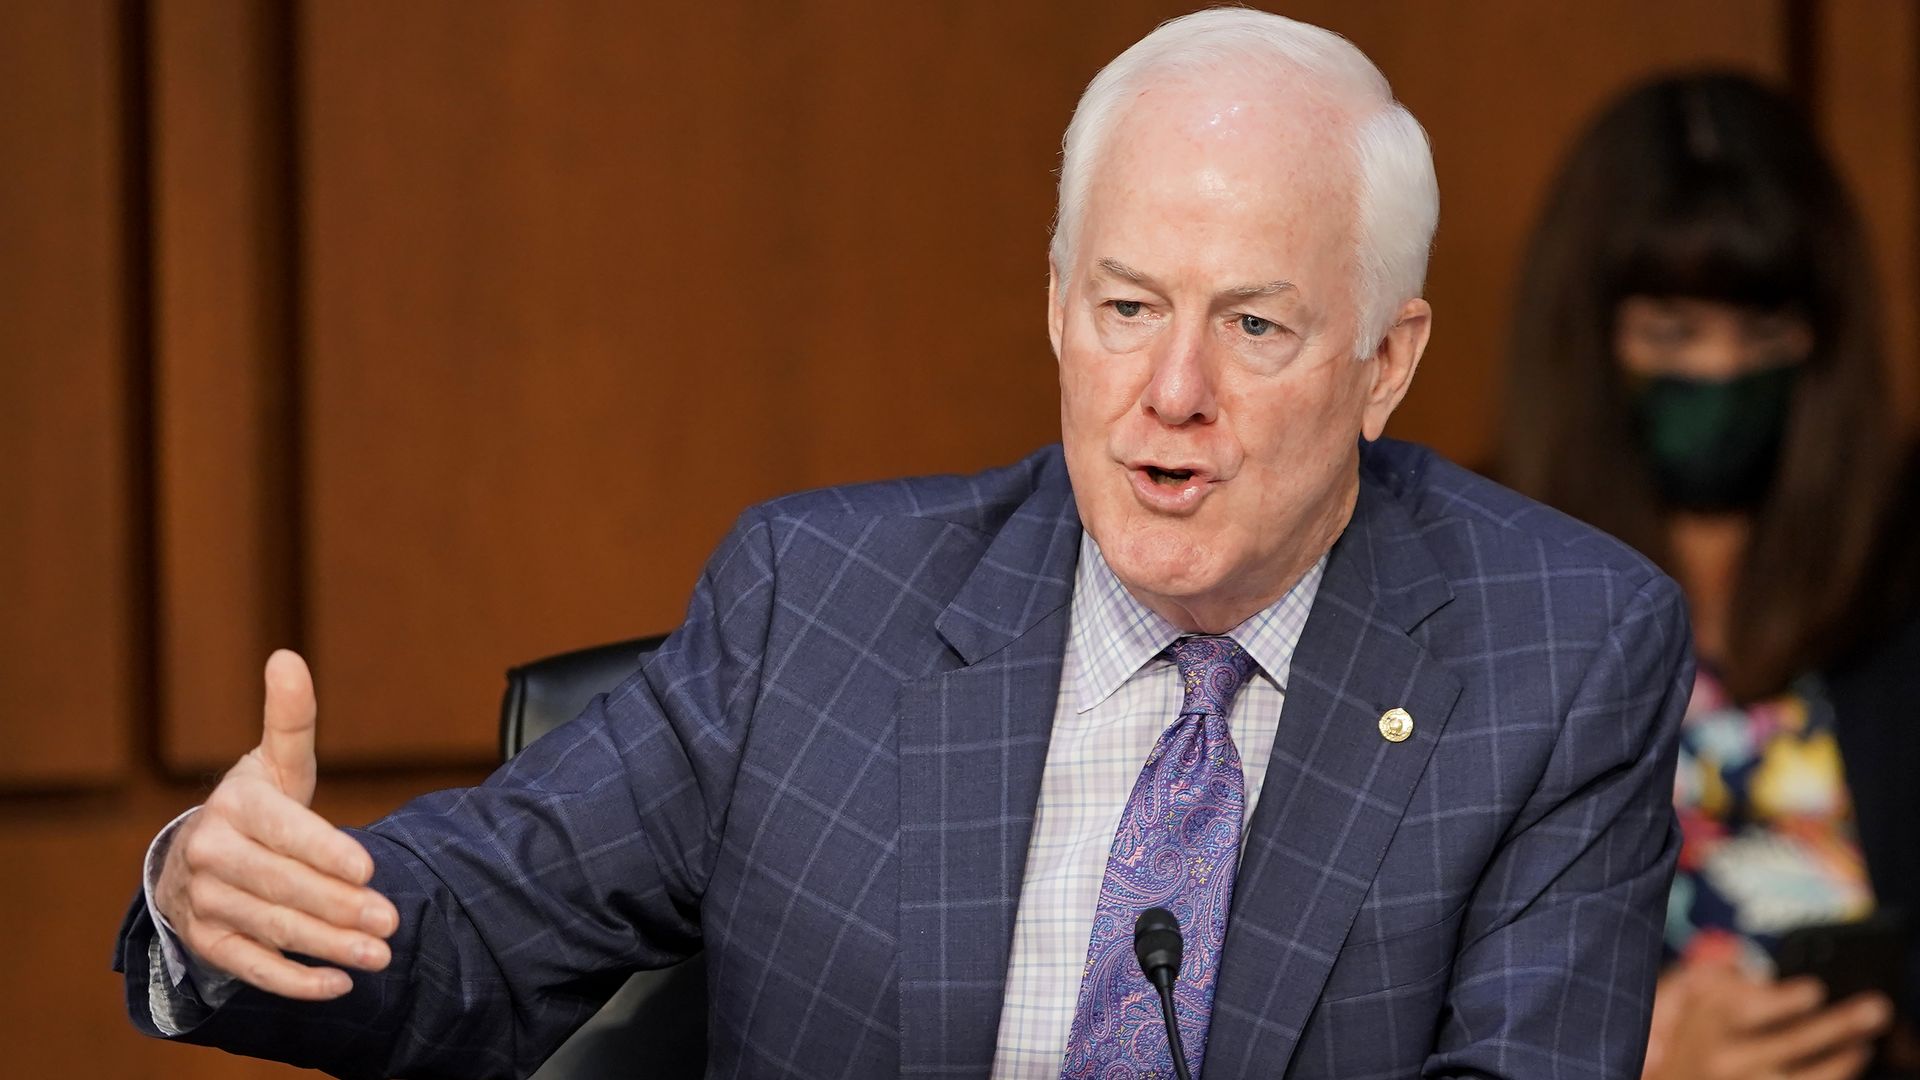 Sen. John Cornyn (R-Texas) speaks during a Senate Judiciary Committee meeting on October 15, 2020. Photo by Greg Nash-Pool/Getty Images